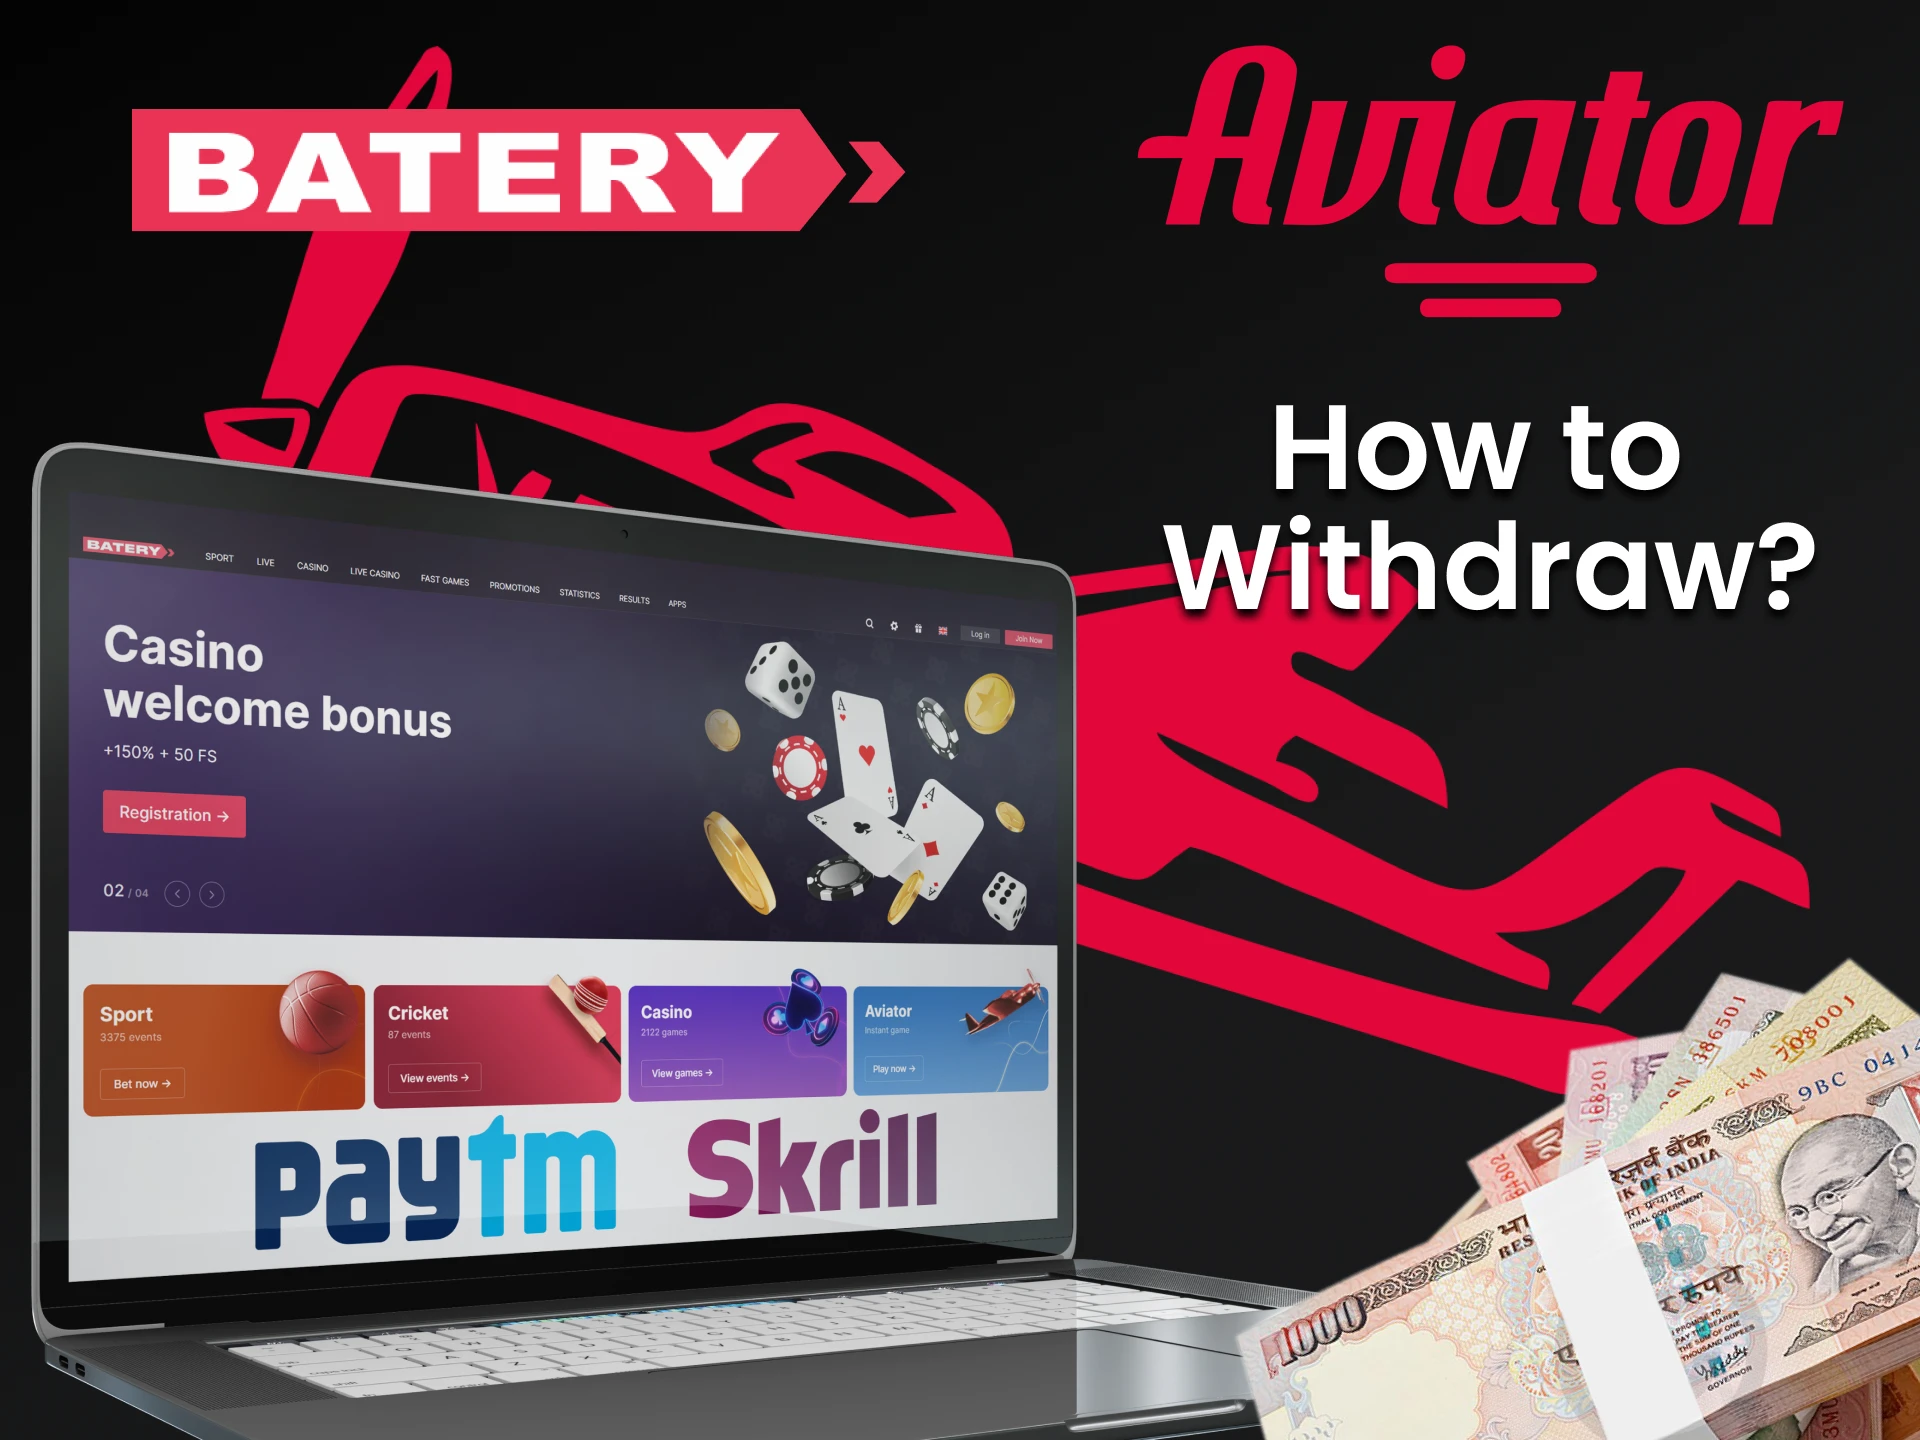 Withdraw your winnings to Aviator on Batery.